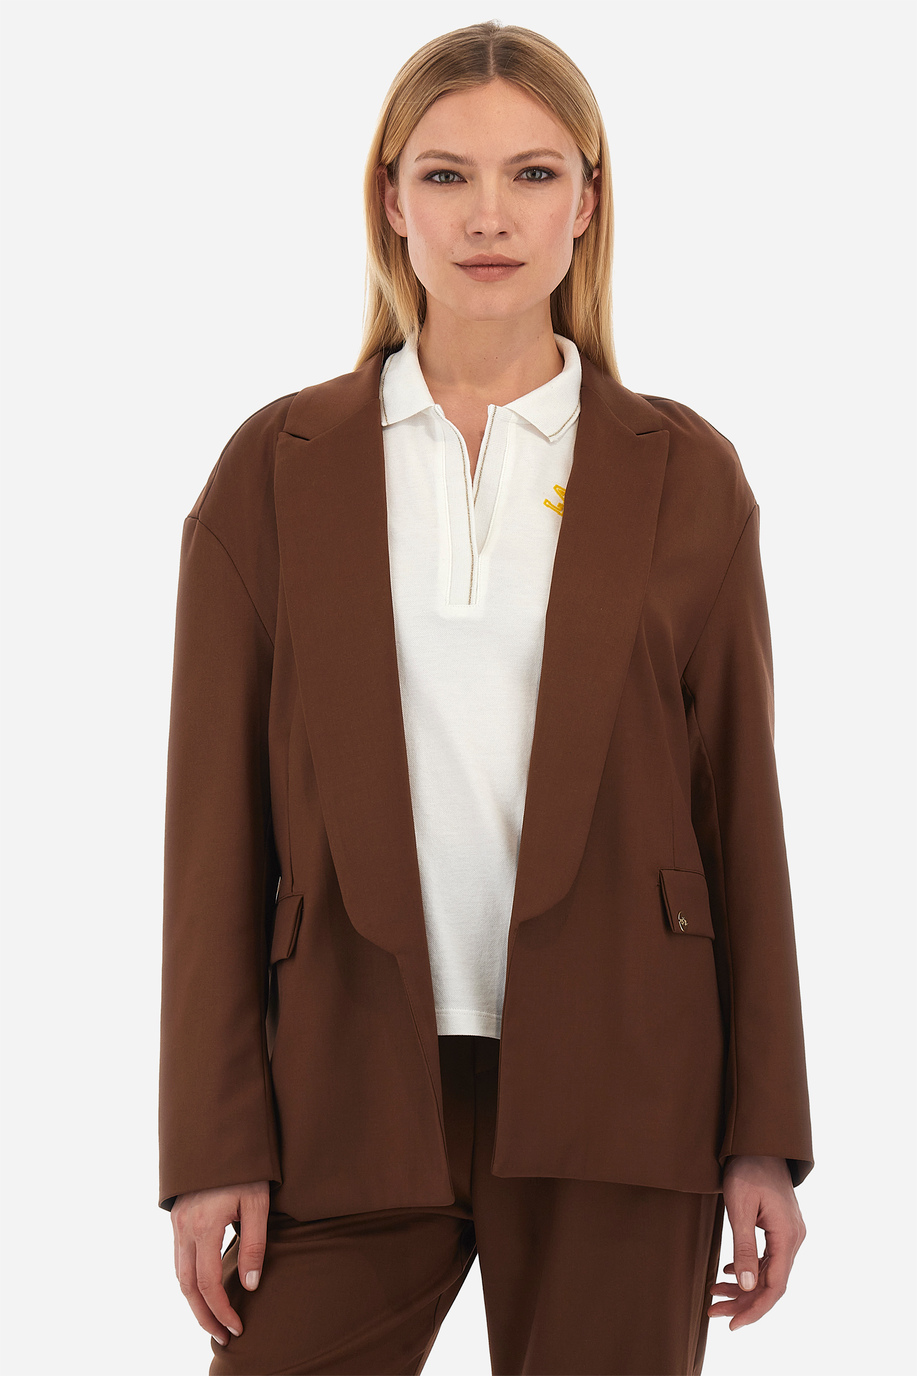 Oversized women's jacket - Wandy - Our favourites for her | La Martina - Official Online Shop